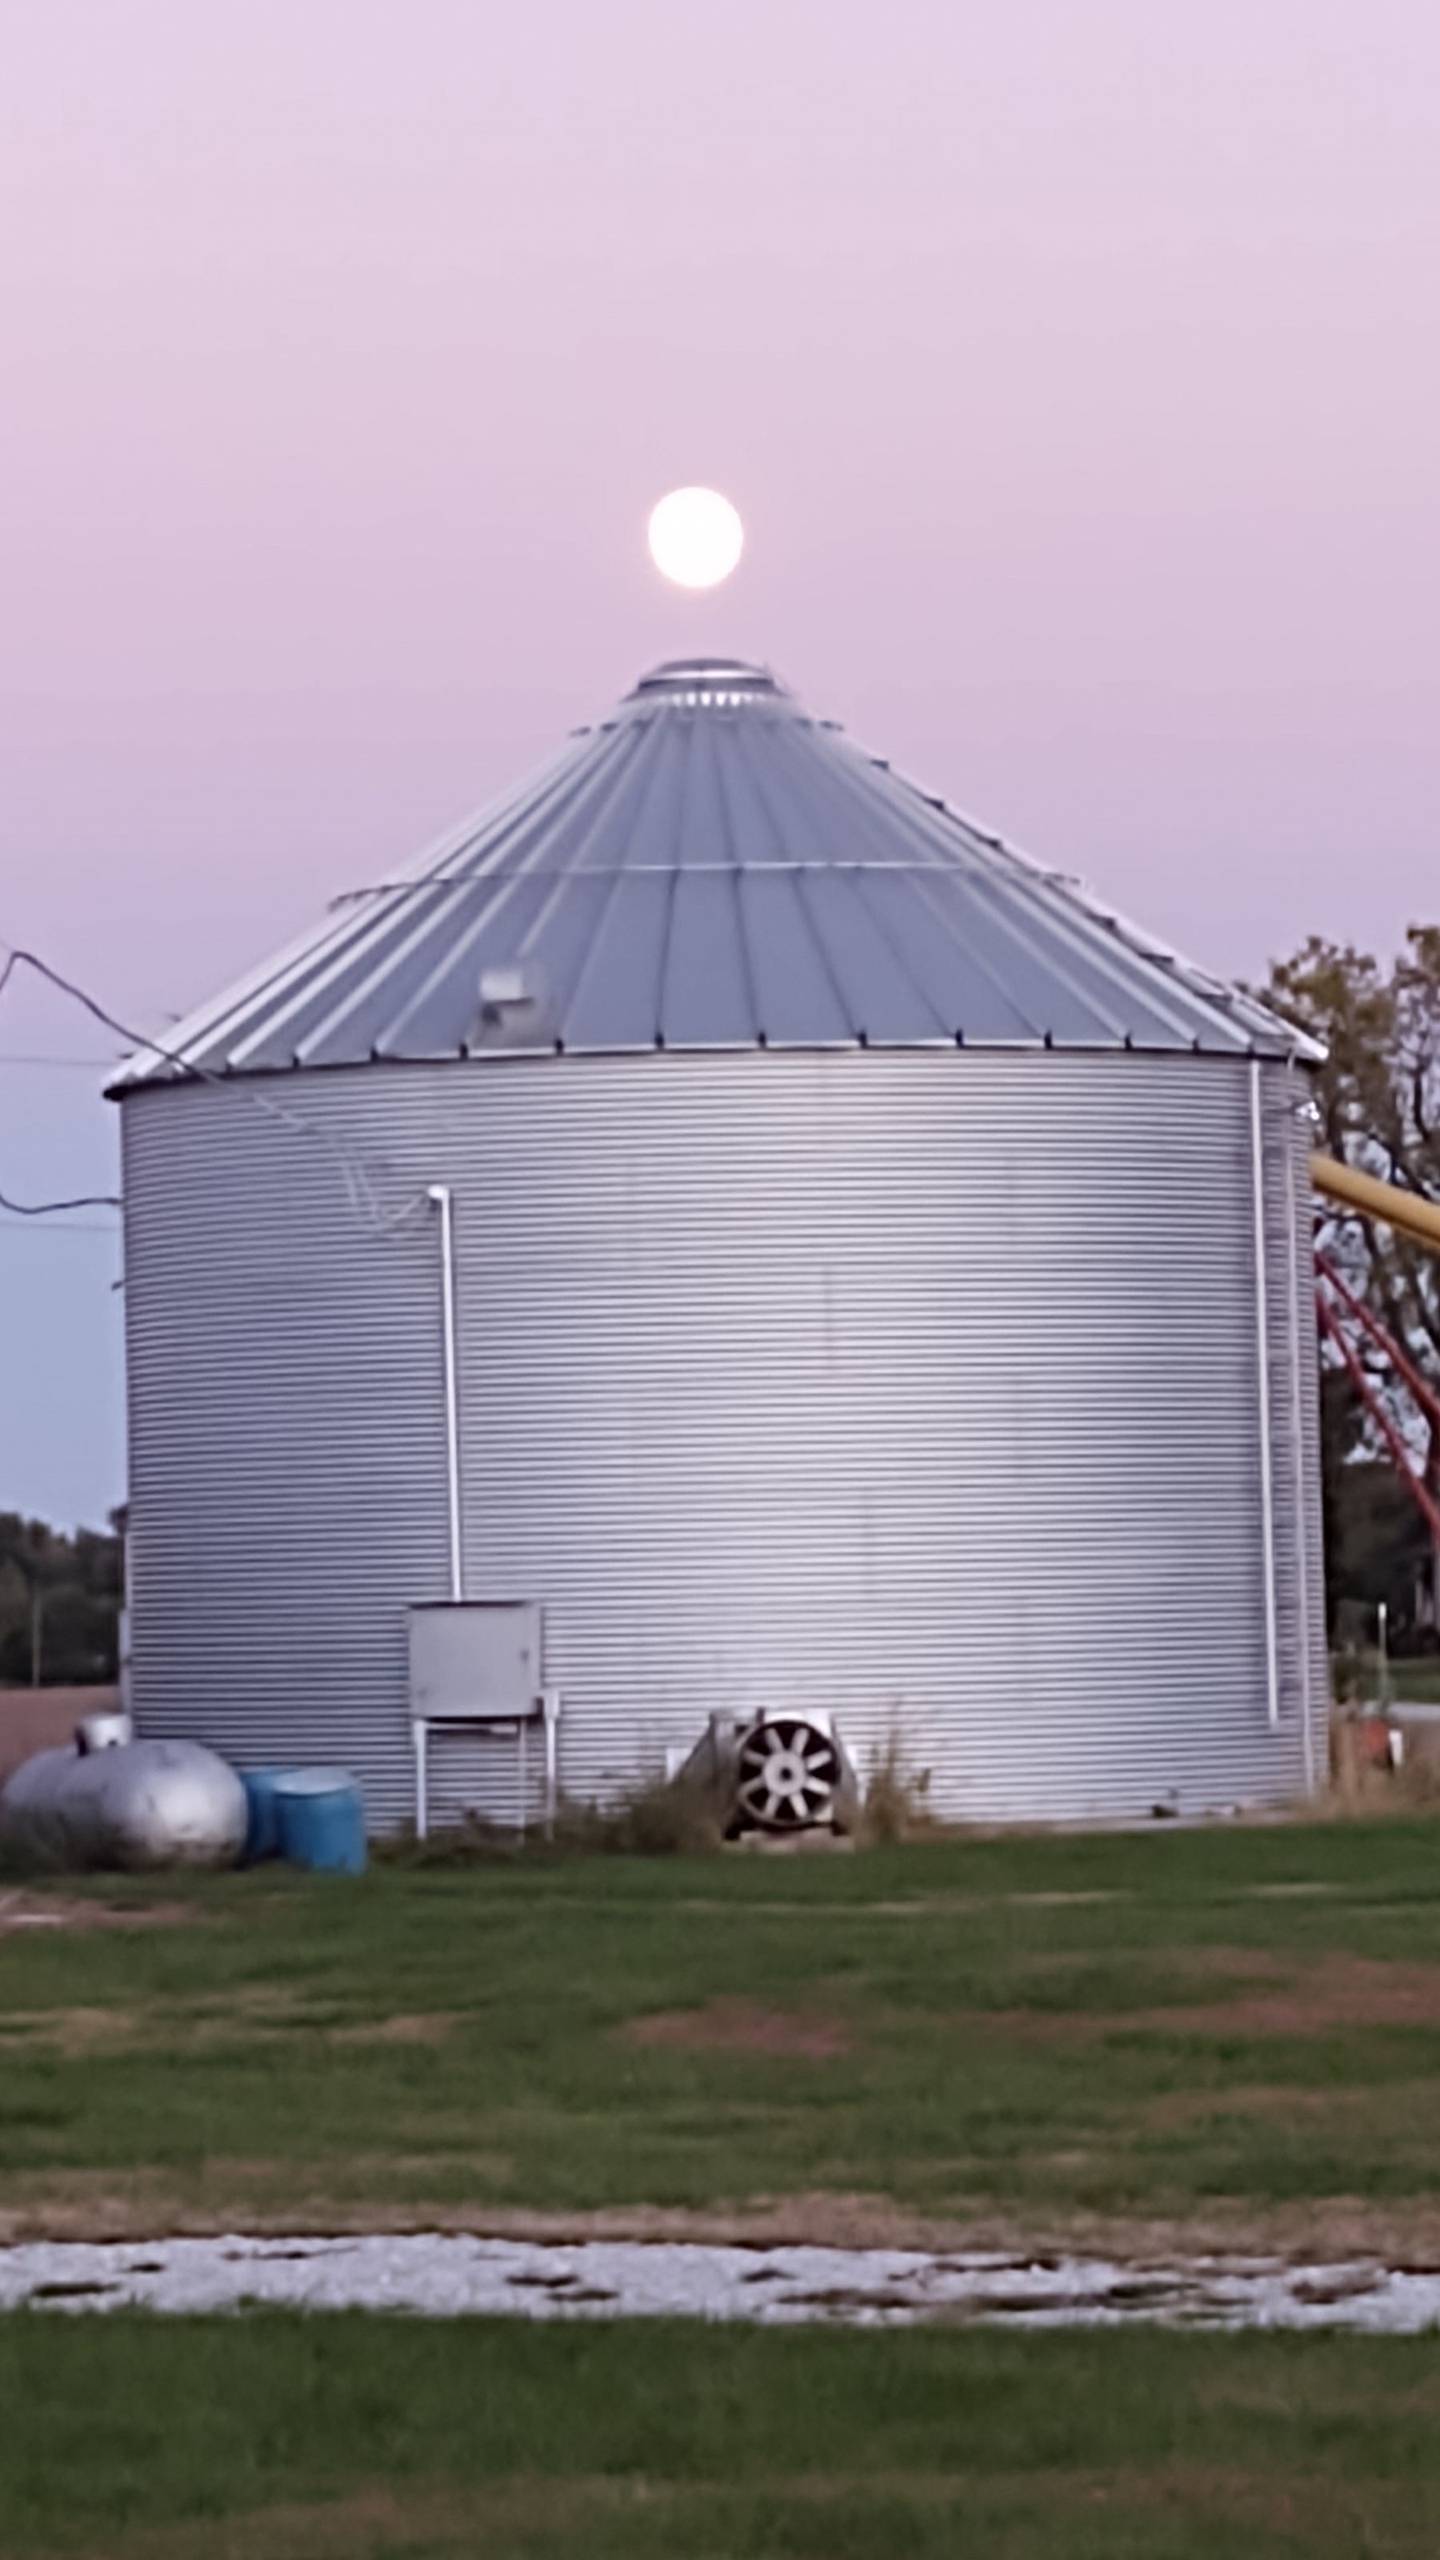 “Harvest Moon” — Joette Webber: “During harvest, the moon rose right over the top of the bins while unloading.”